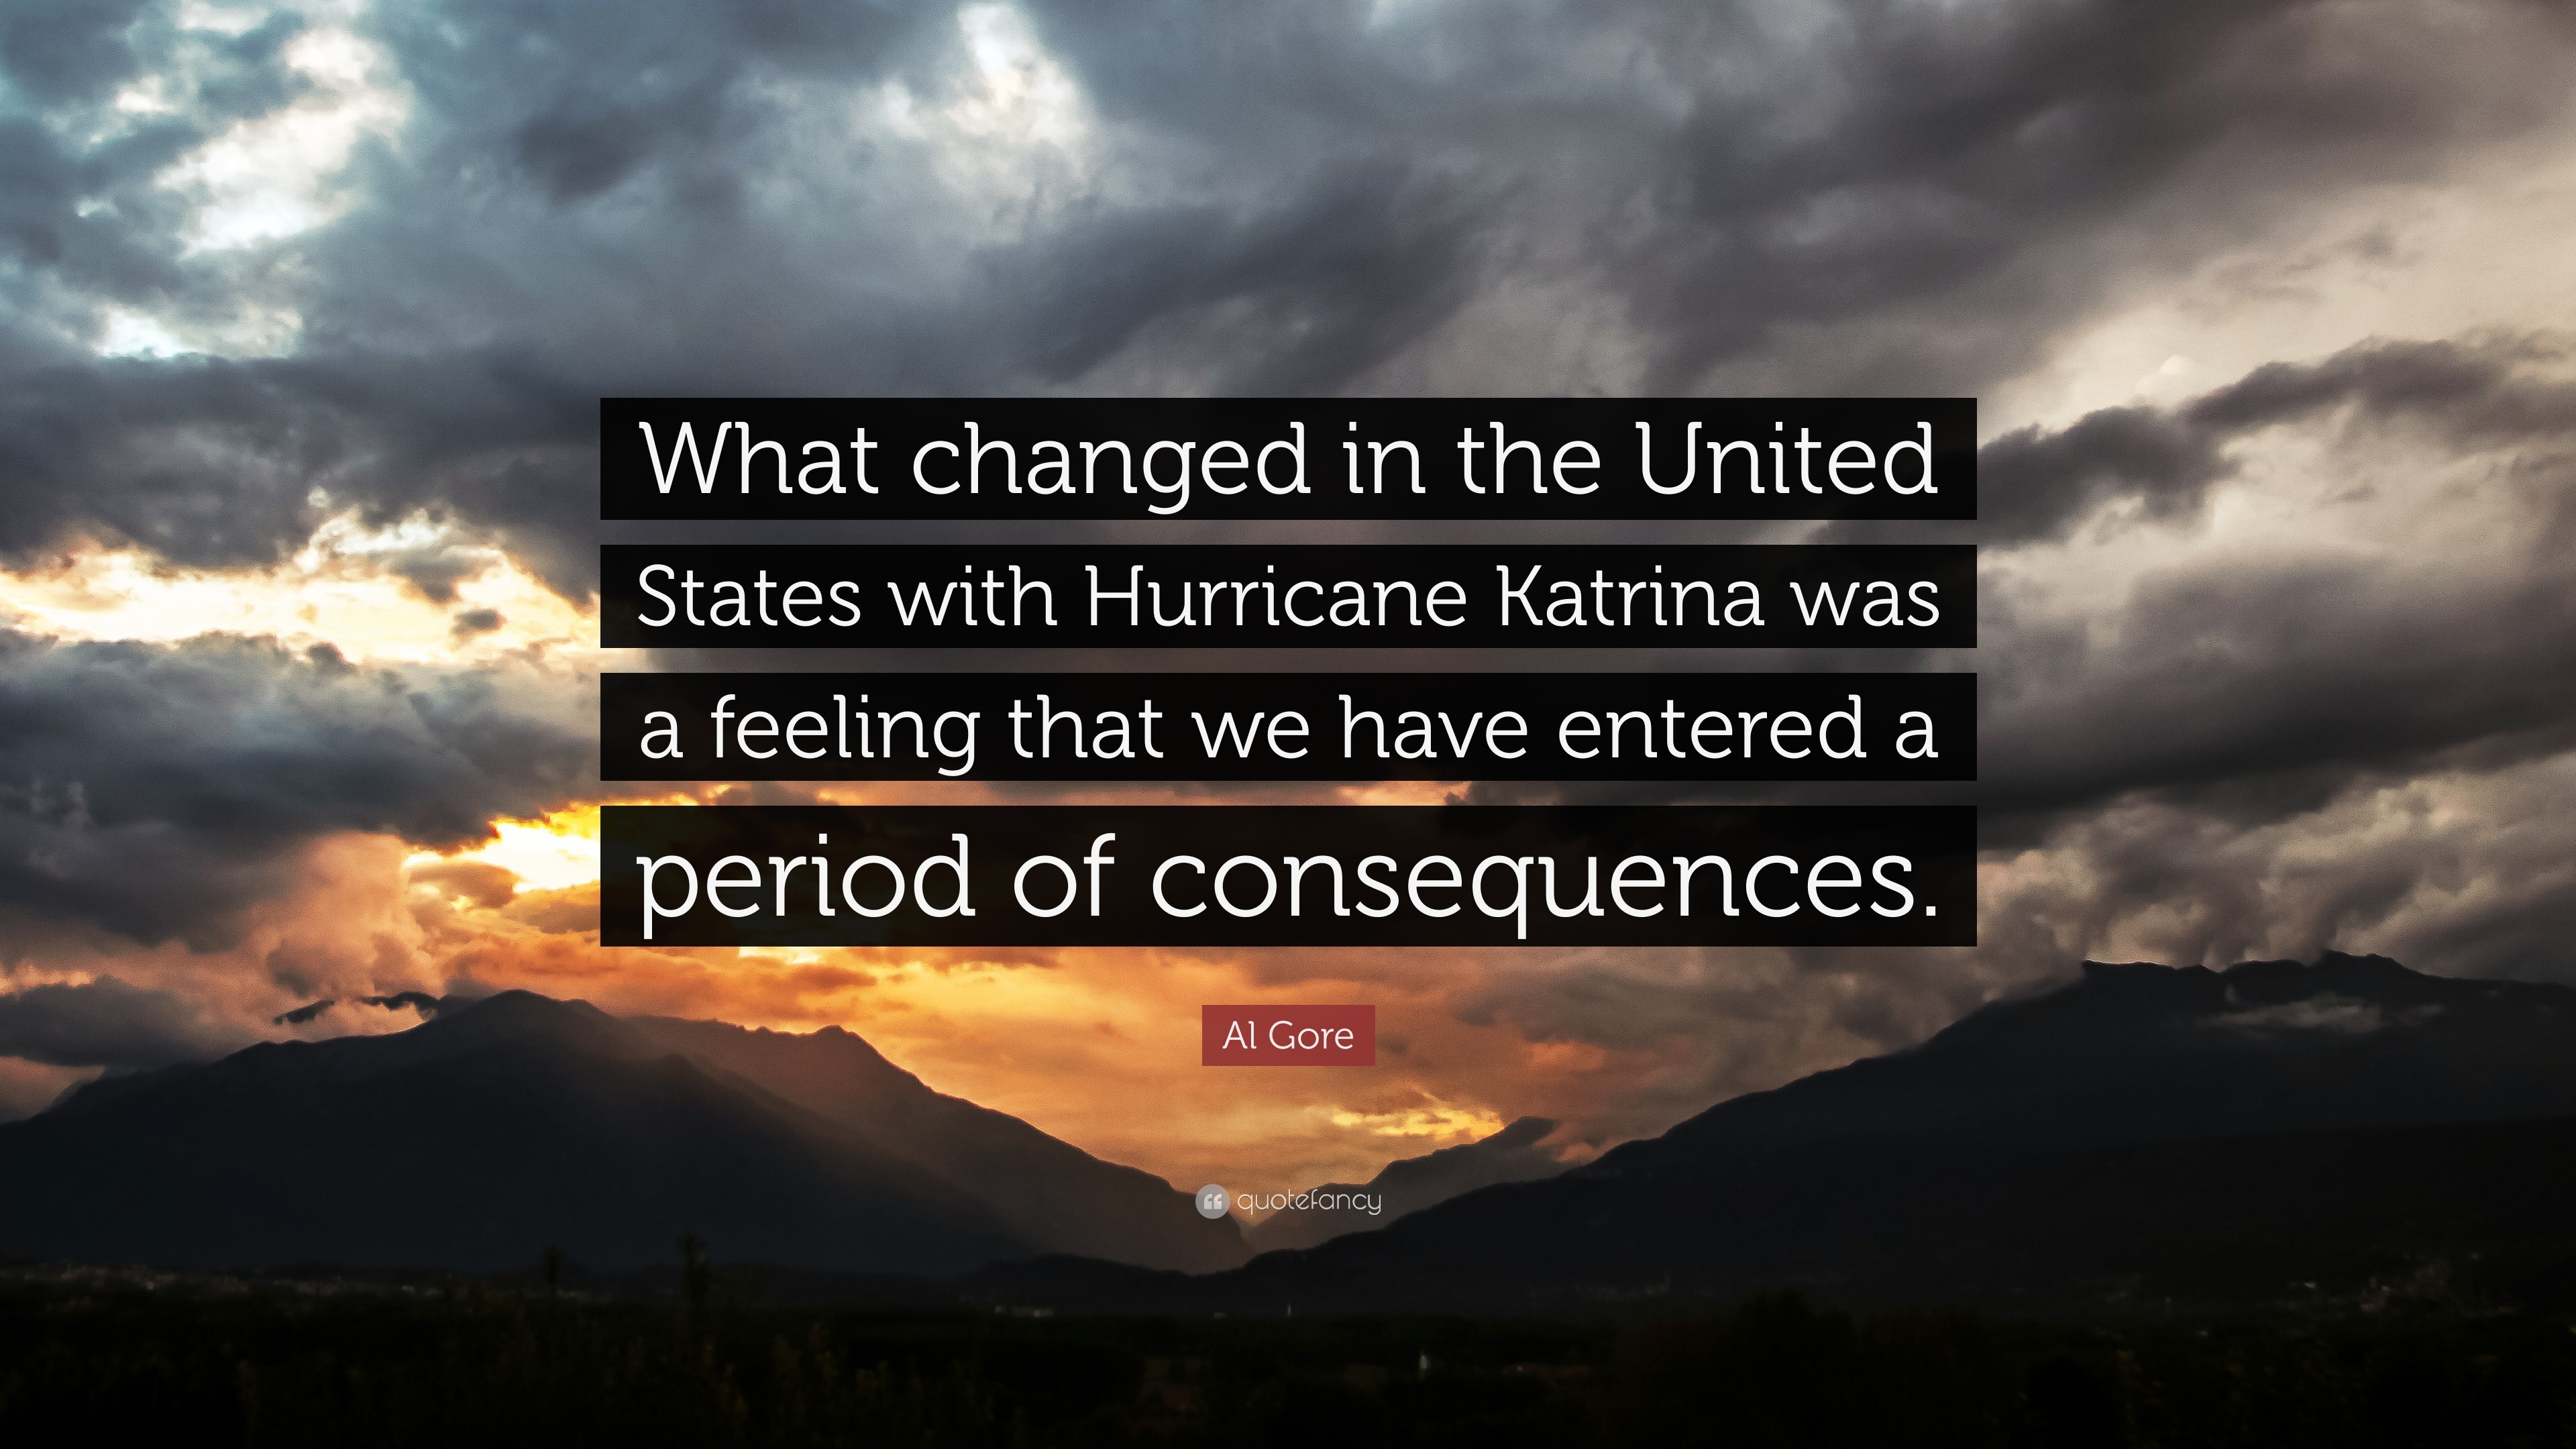 3840x2160 Al Gore Quote: “What changed in the United States with Hurricane Katrina  was a